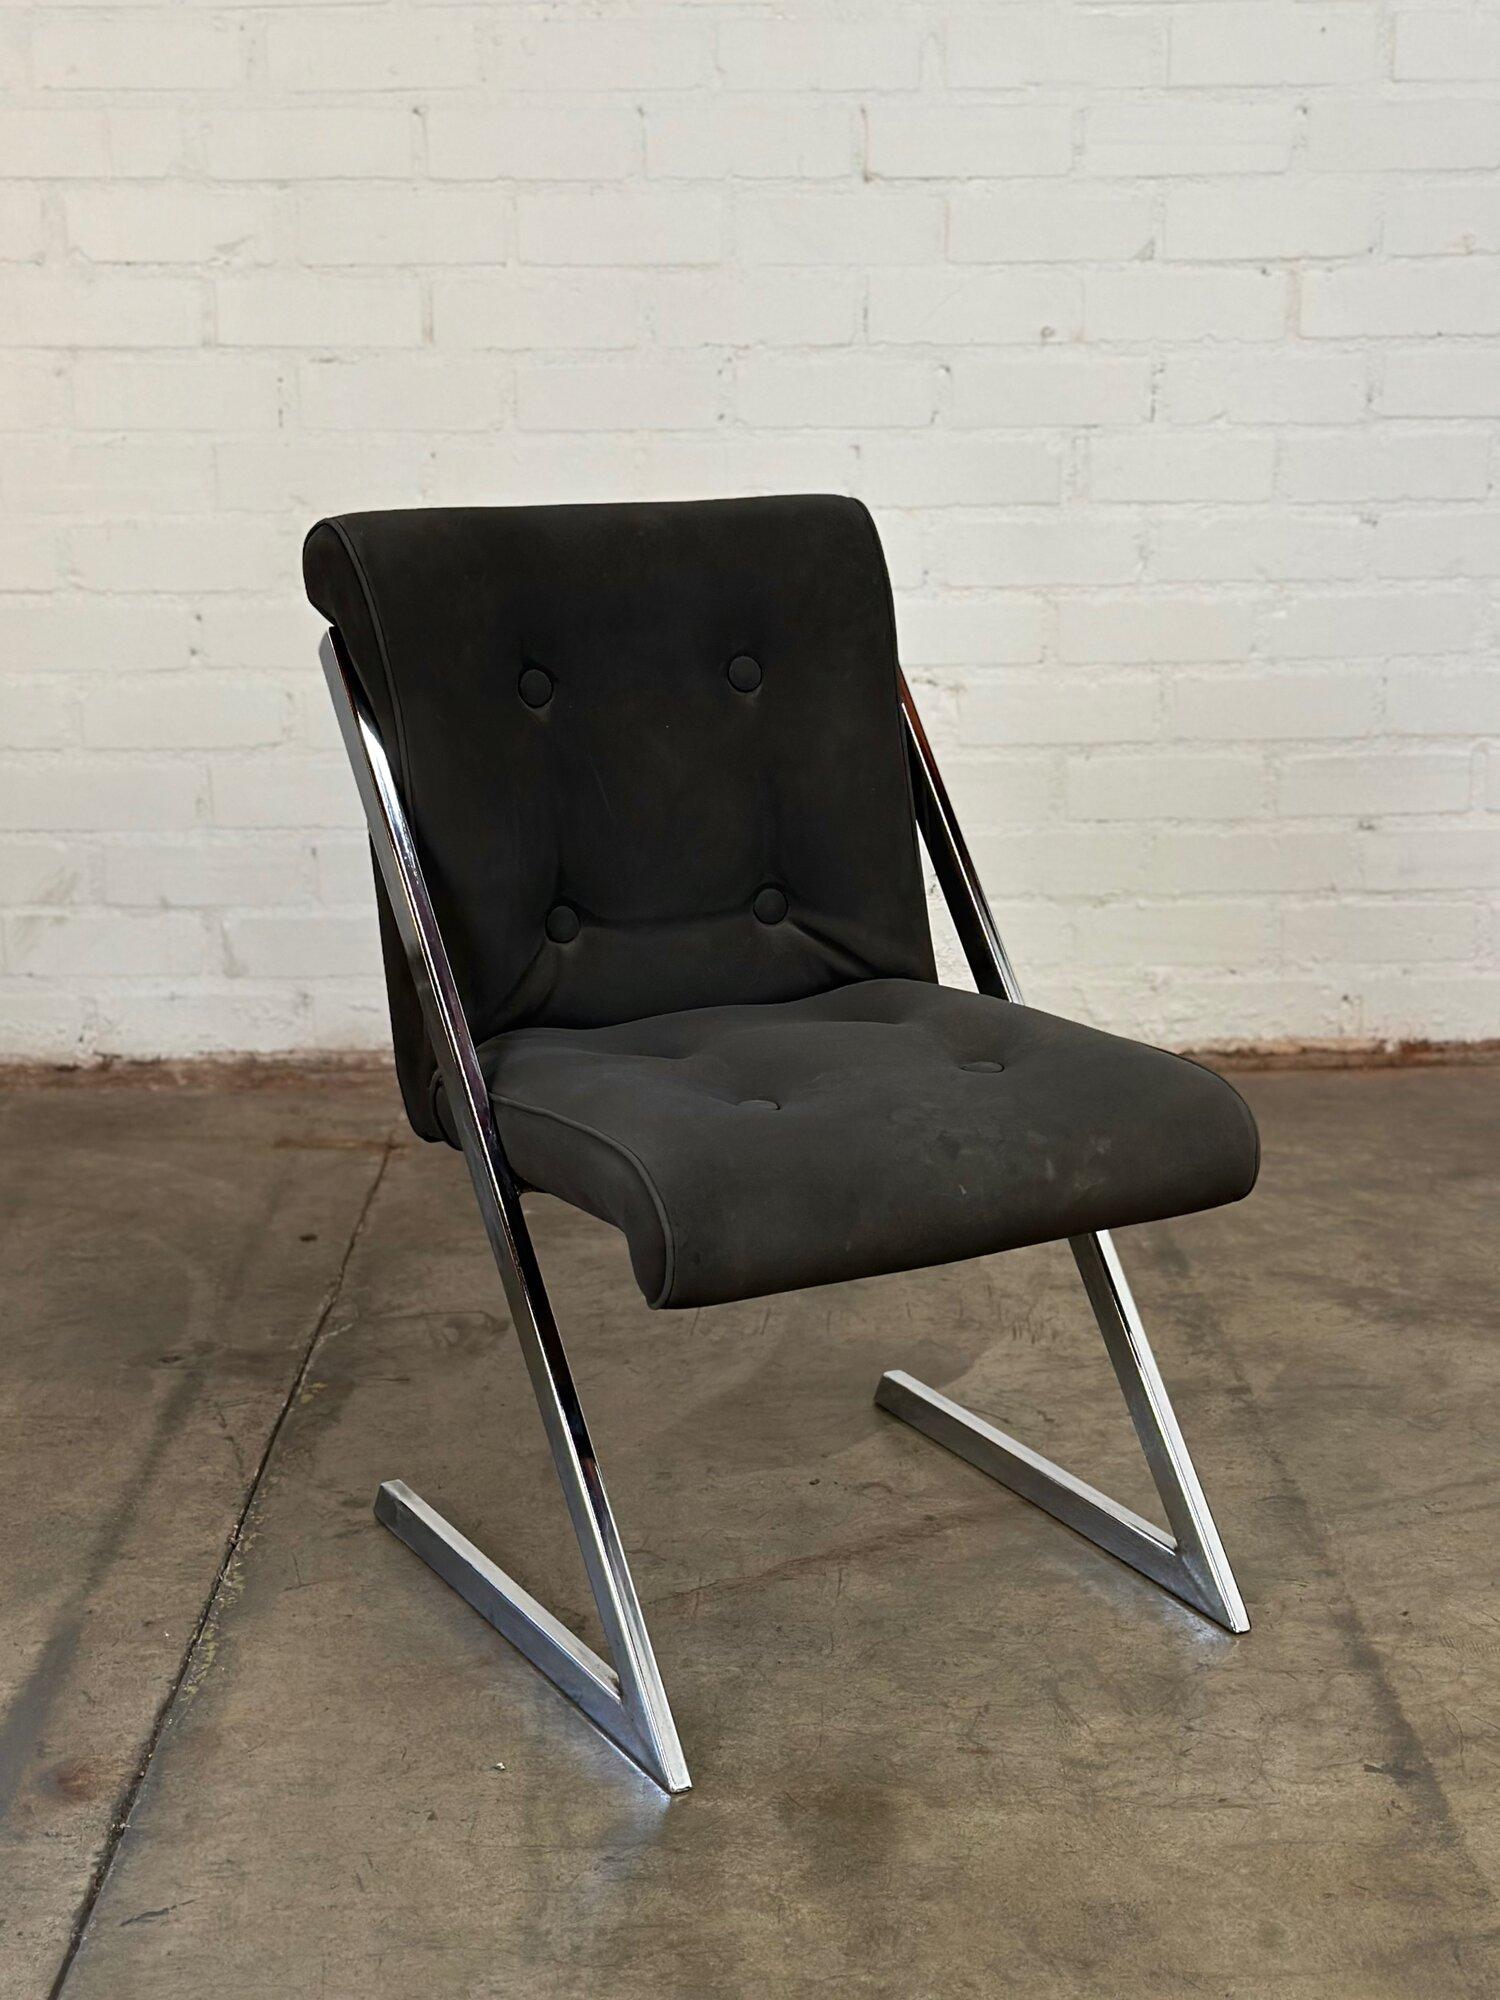 W21 D24 H33 SW19.5 SD18 SH16

Vintage Z chairs in chrome with original thick Naugahyde like upholstery. Chairs are are structurally sound and sturdy with no major areas of wear to chrome frames. The upholstery is in tact with no tears but does